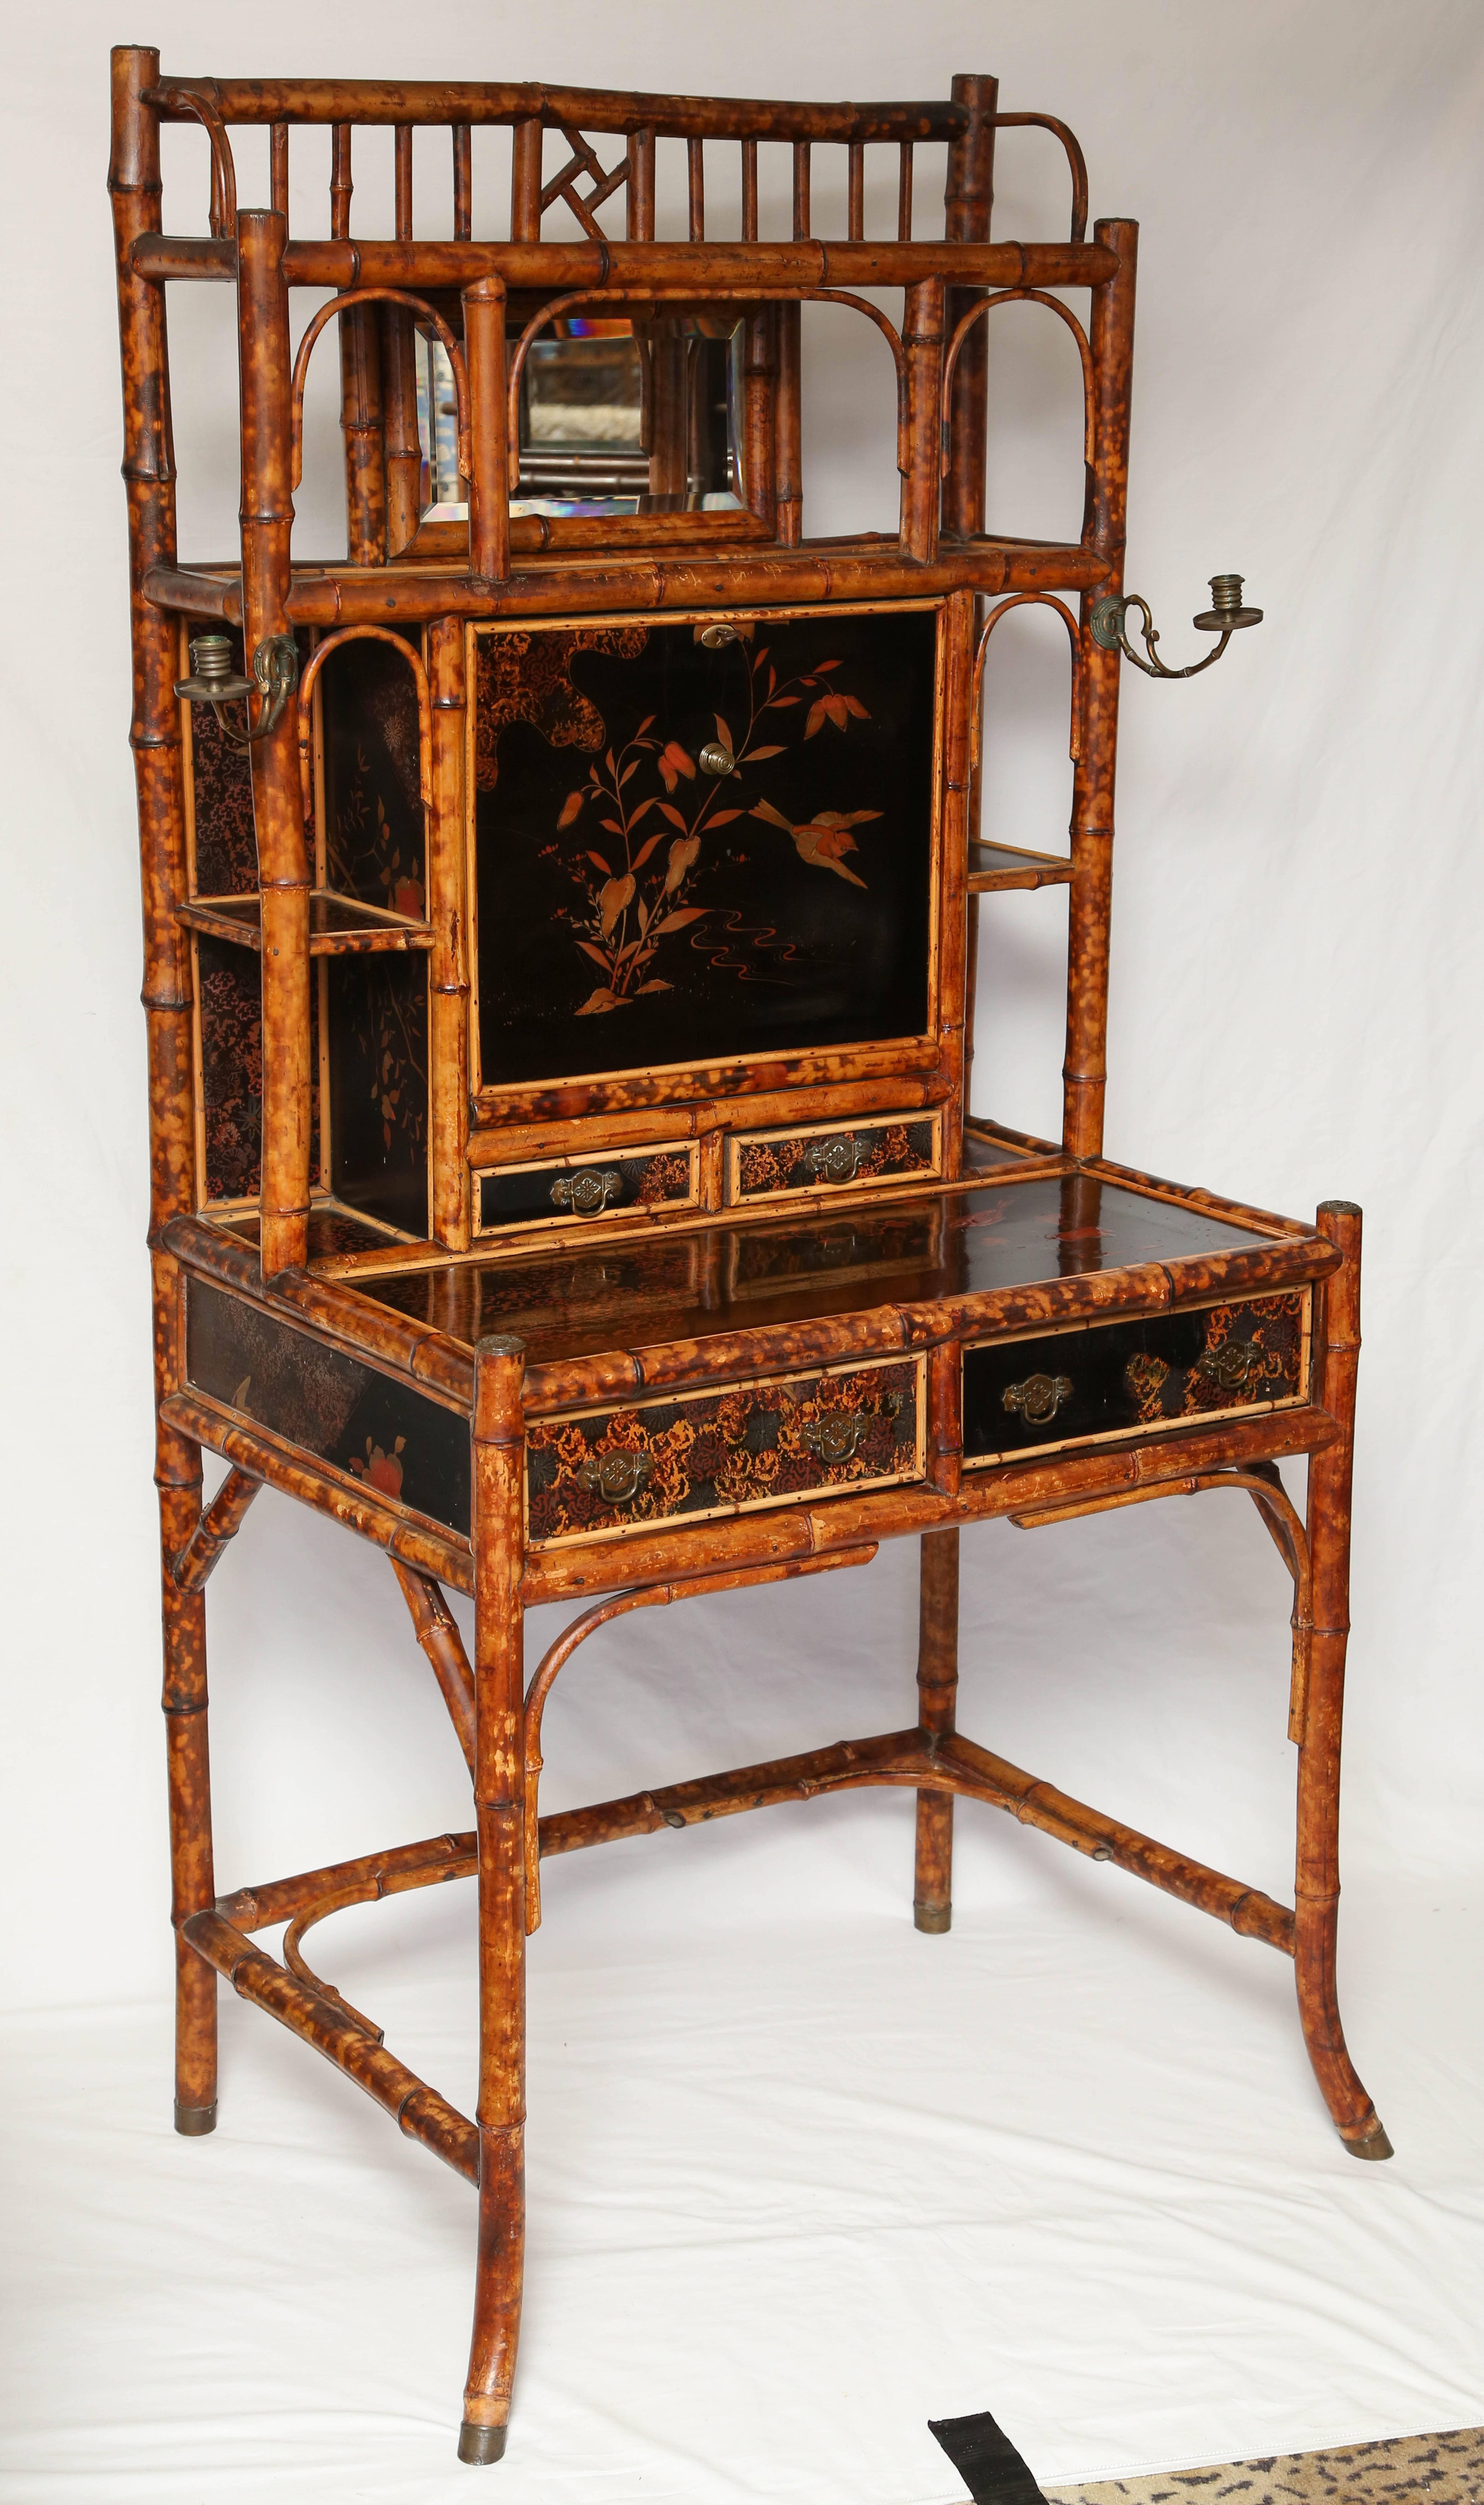 19th English bamboo secretary with four drawers, candleholders, bevel mirror japanning lacquer, all original.